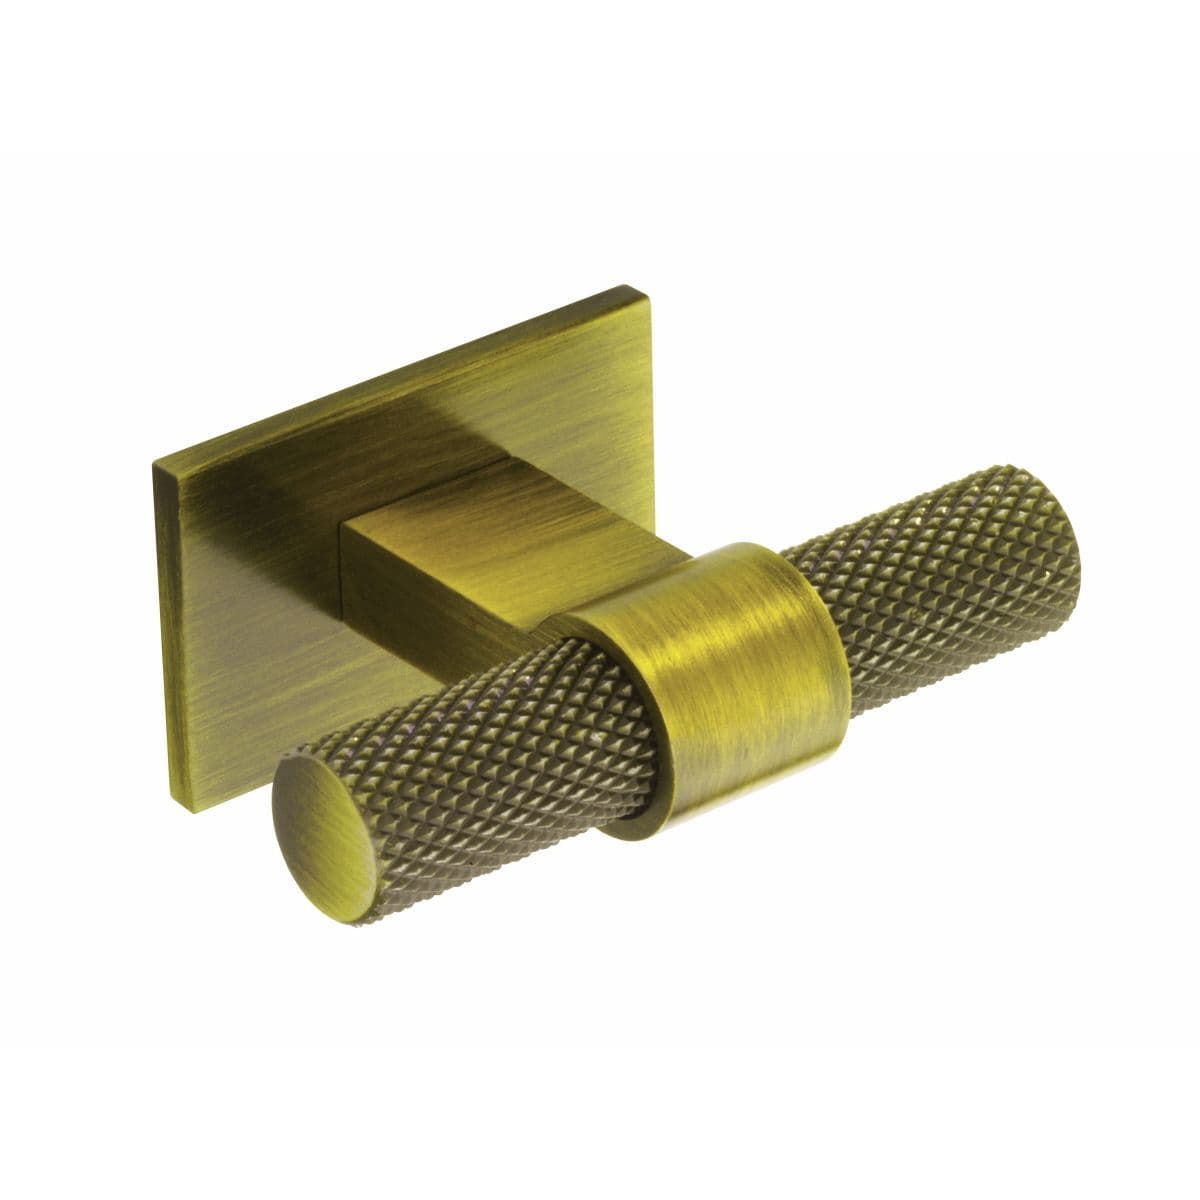 KNURLED T KNOB c/w RECTANGULAR BACKPLATE Cupboard Handle - 60mm long - 3 finishes (PWS H1125.35)